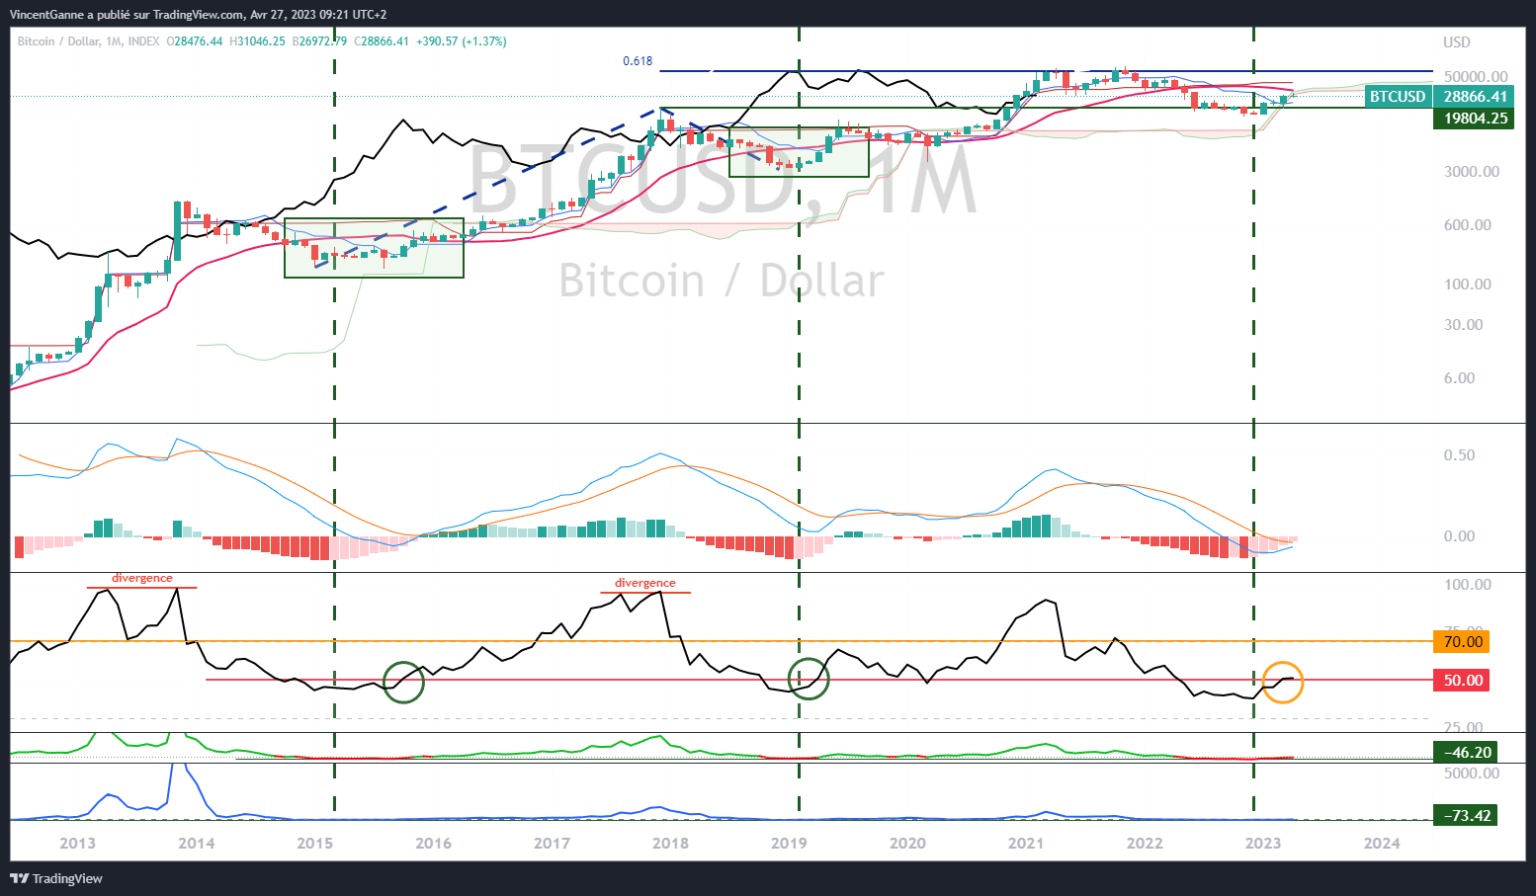 Chart showing the bitcoin price in monthly Japanese candlesticks and with a logarithmic scale